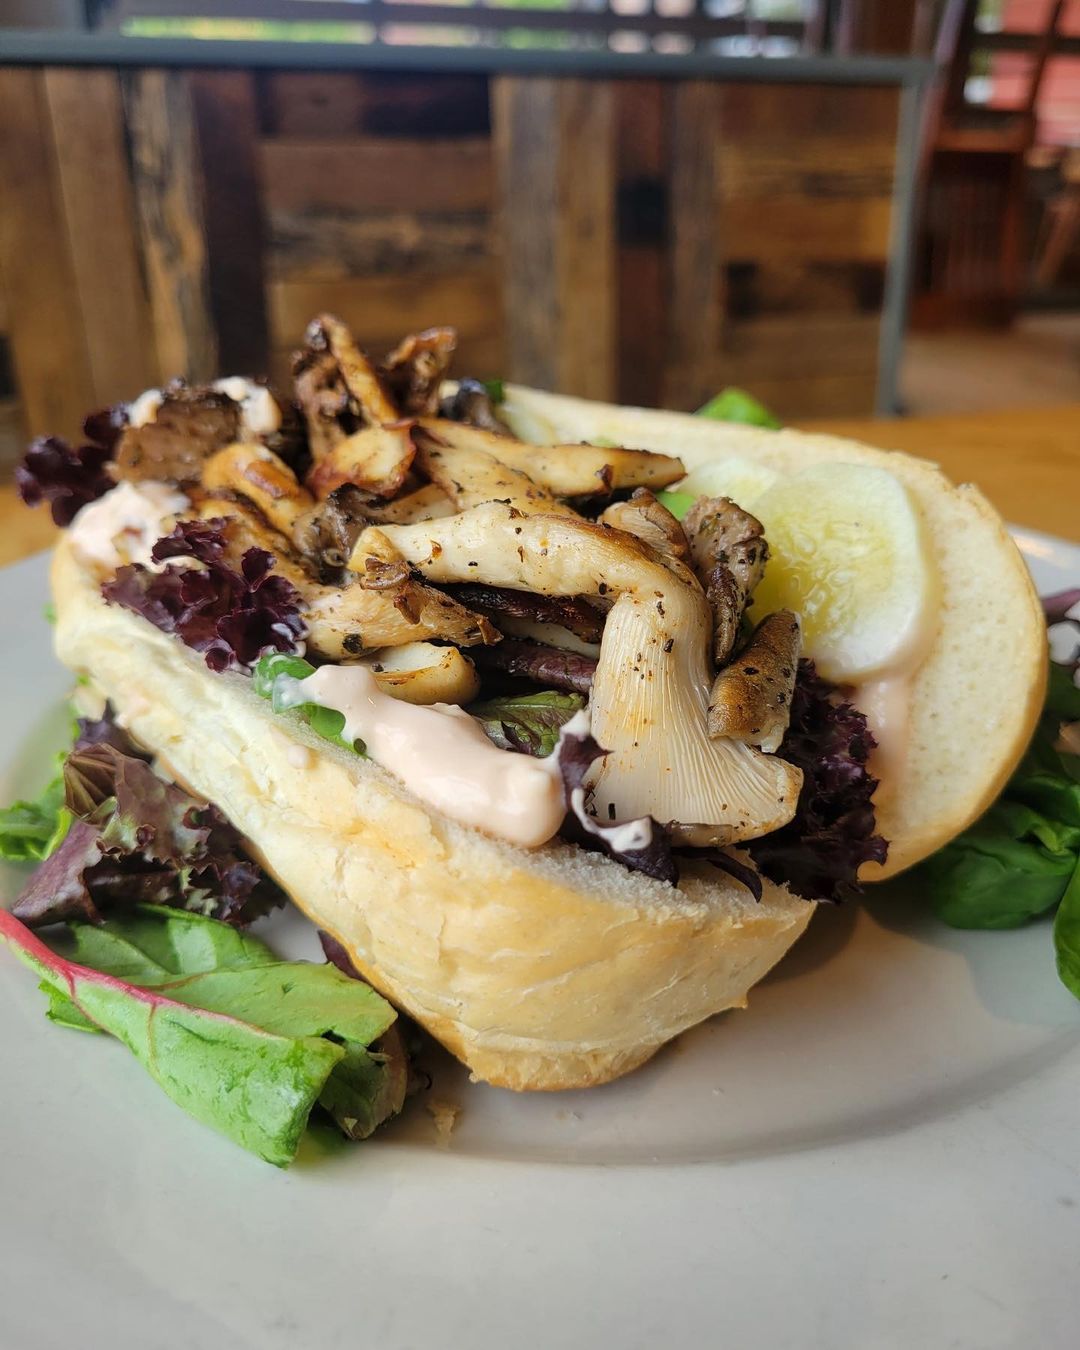 Grilled Mushroom Po Boy from The Wild Cow Vegetarian Restaurant. Photo by Instagram user @thewildcow